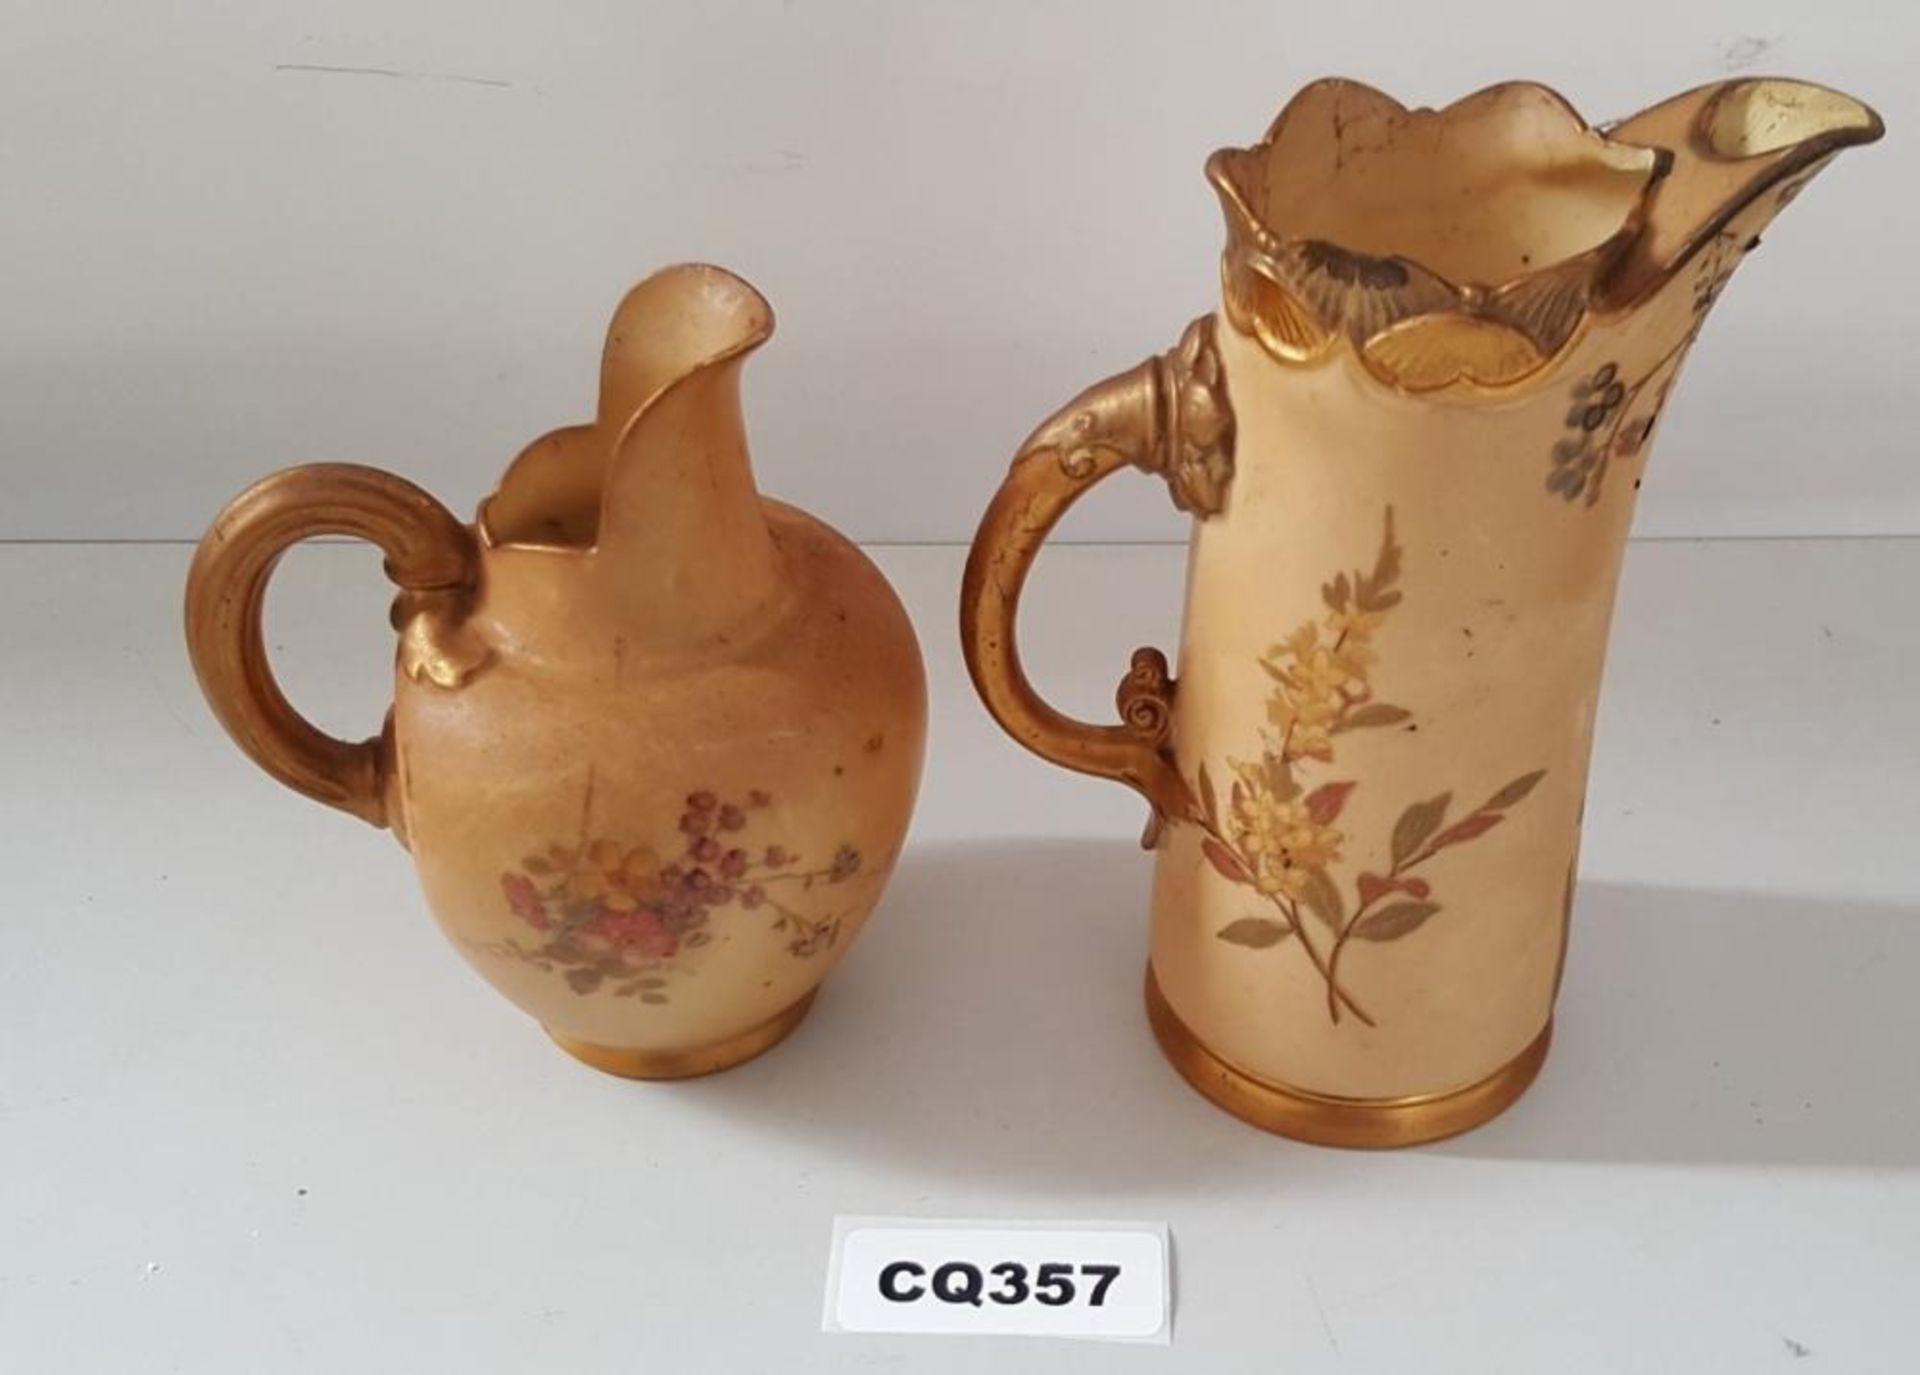 1 x A Pair Of Royal Worcester Blush Ivory Jugs(1094&1229) - Ref CQ357 E - Dimensions: 1094(H12/L10cm - Image 2 of 4